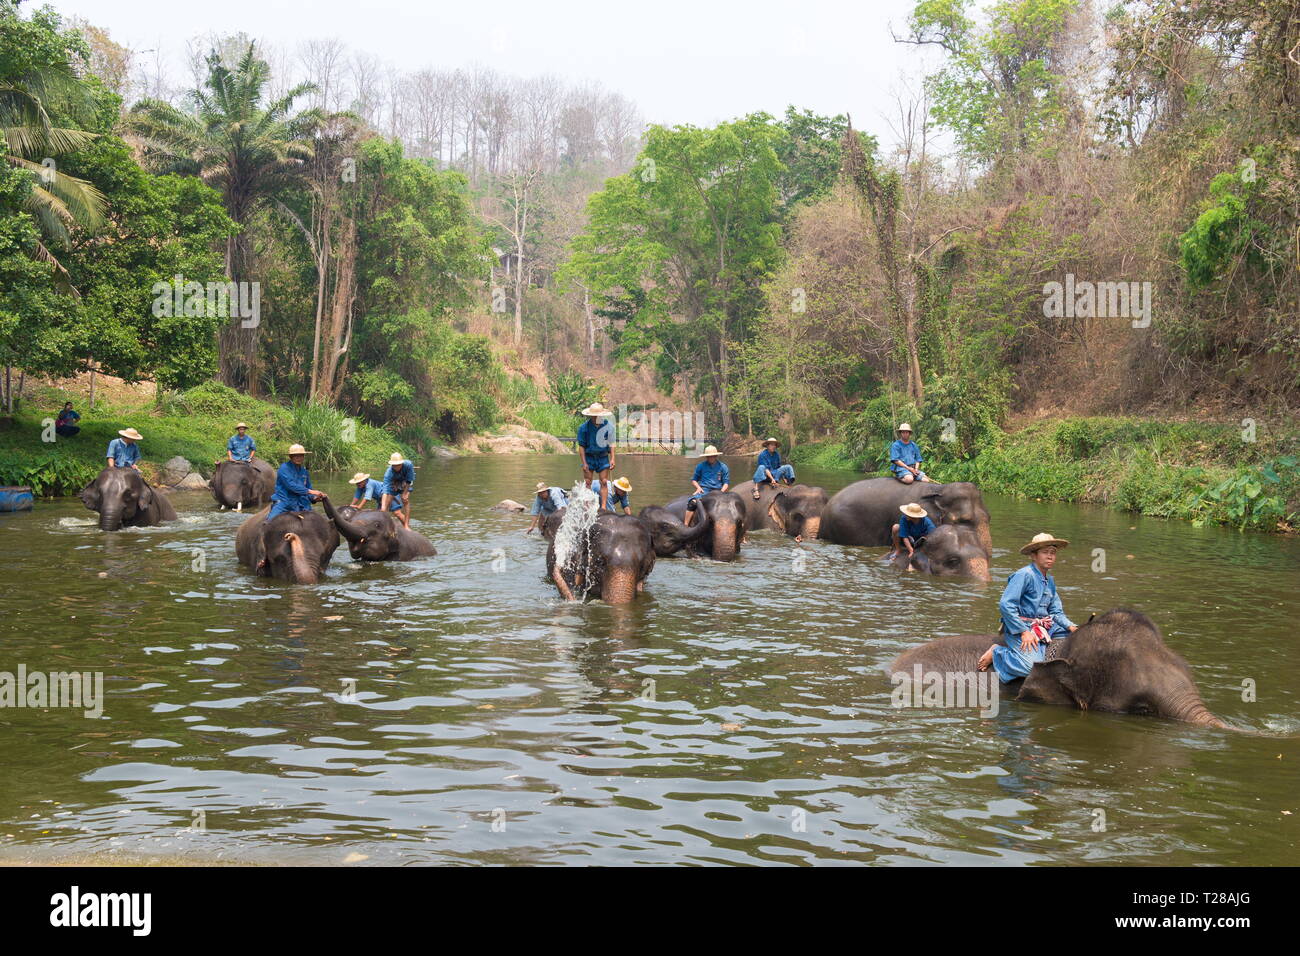 Lampang, Thailand - March 30, 2019: Elephant show at Thai Elephant Conservation Center in Lampang Province, Thailand. Stock Photo